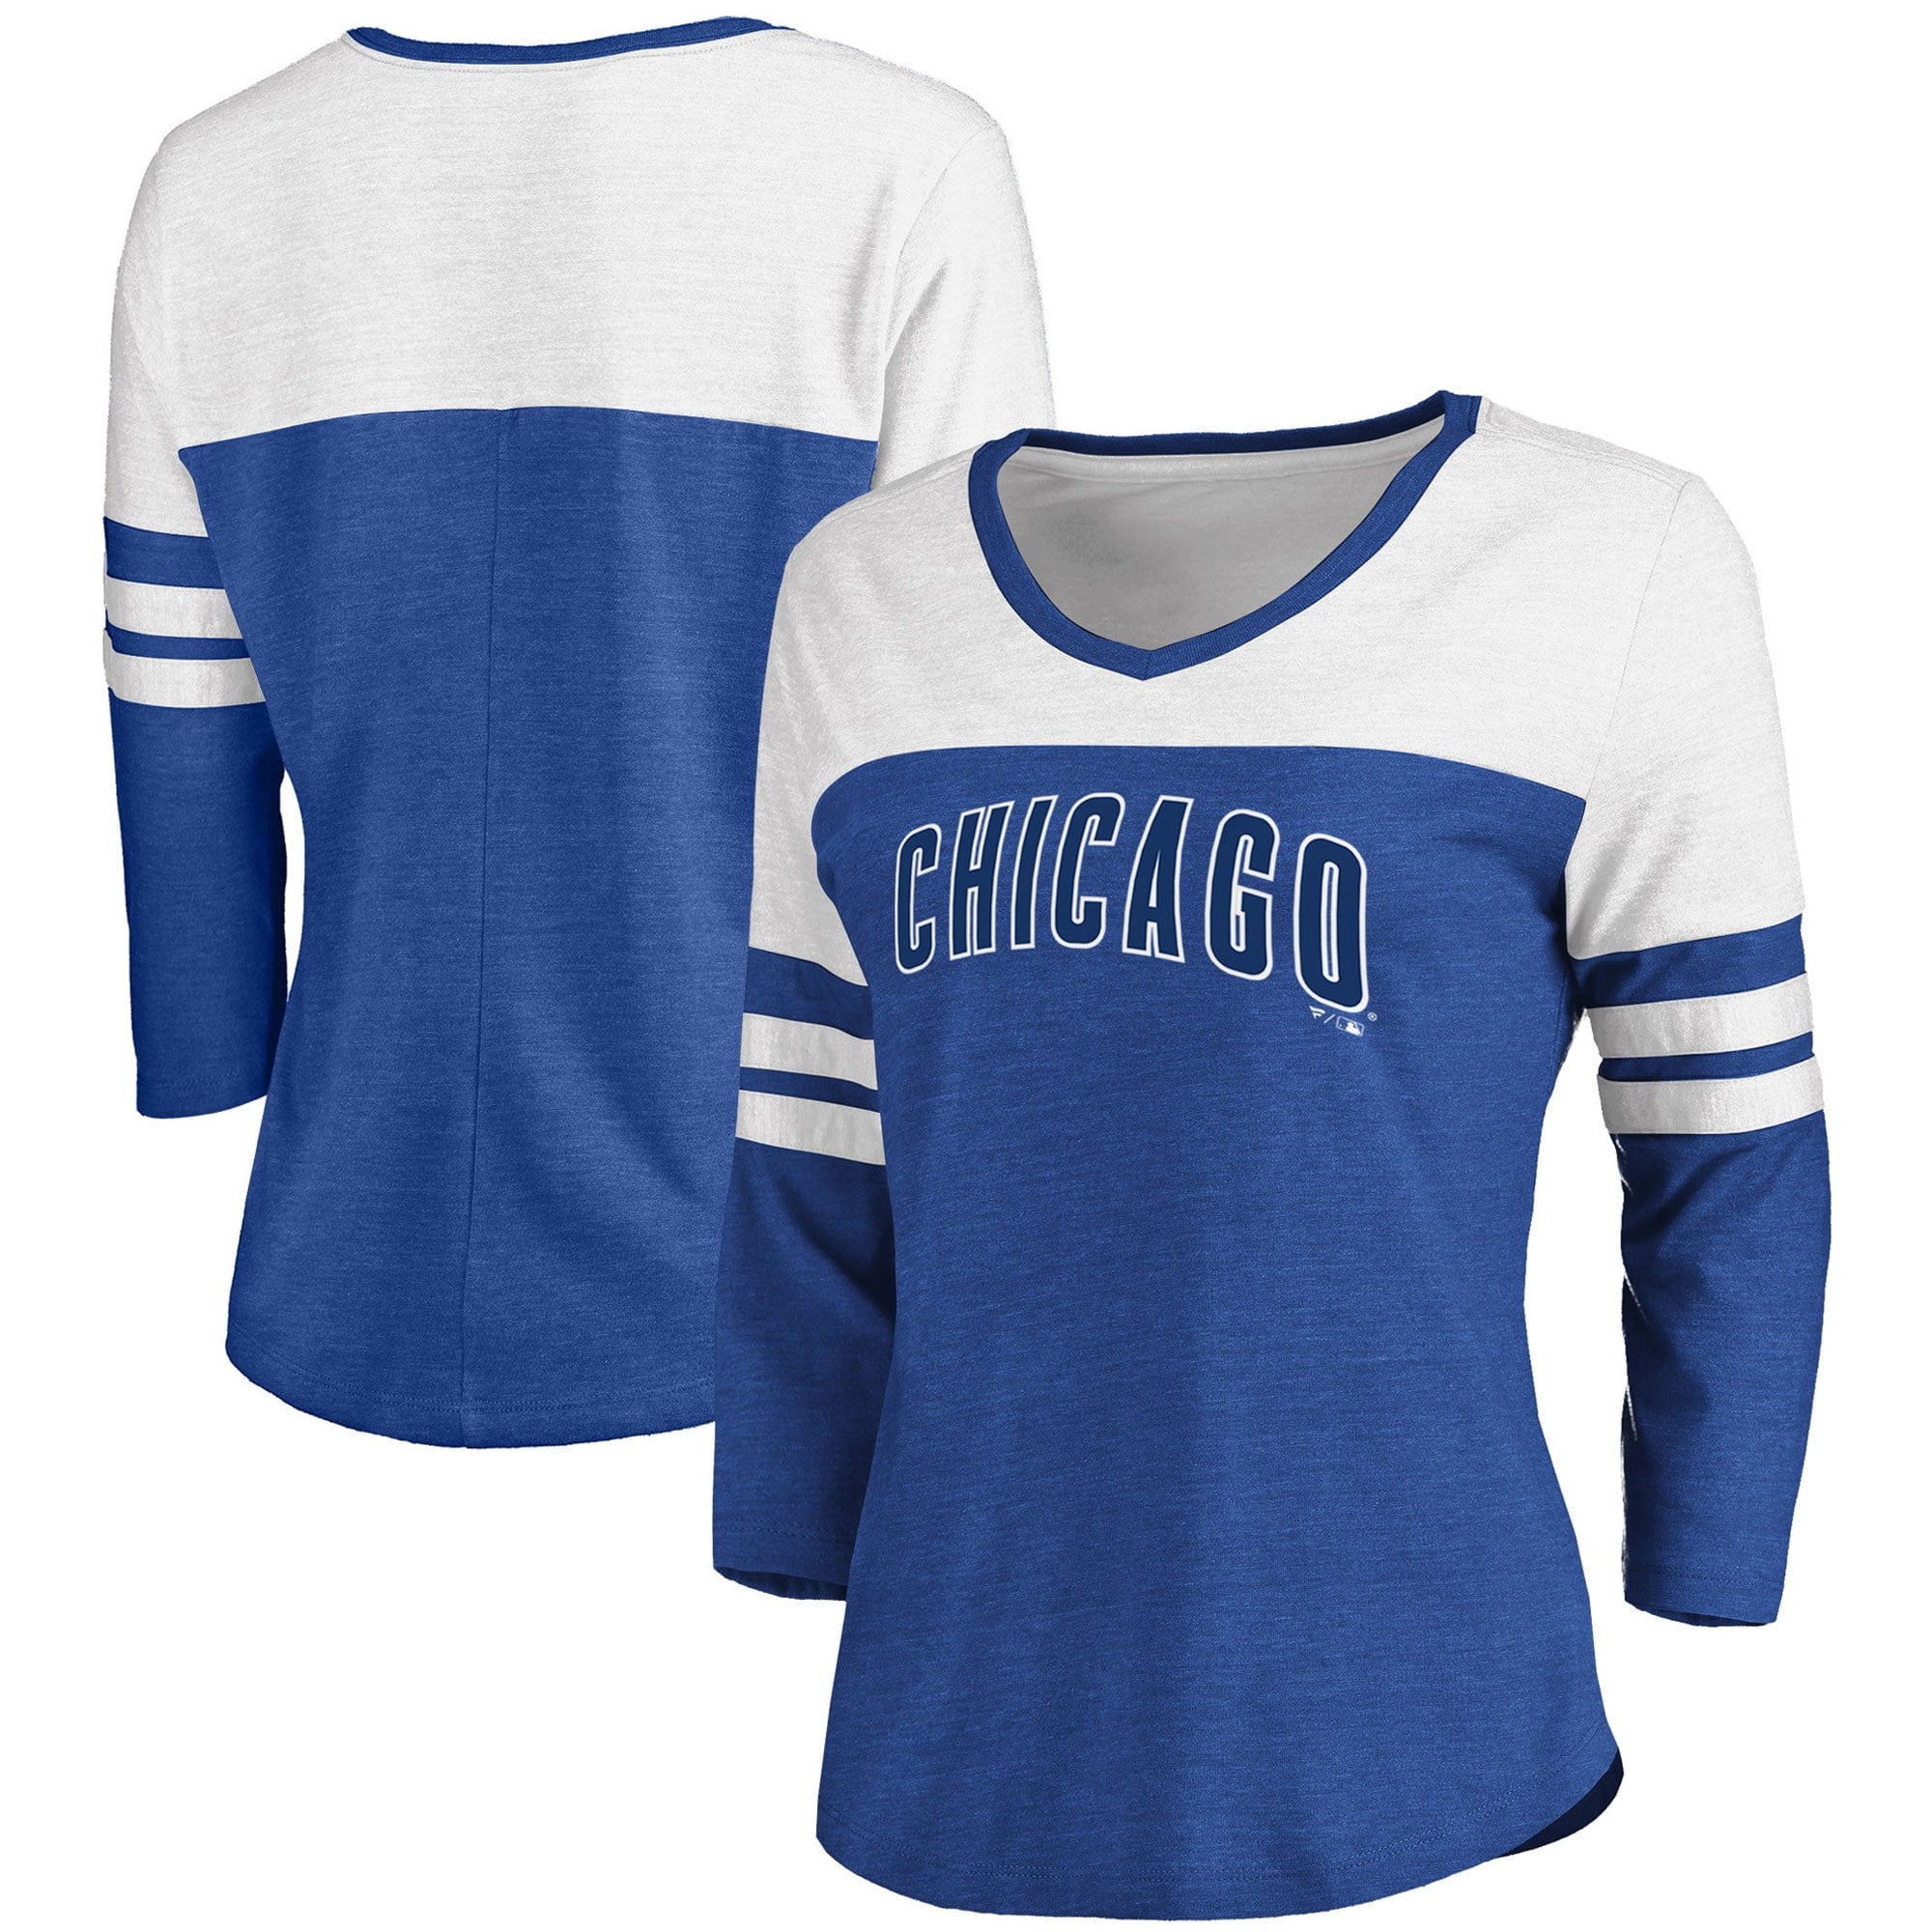 Women's Fanatics Branded Heathered Royal/White Chicago Cubs